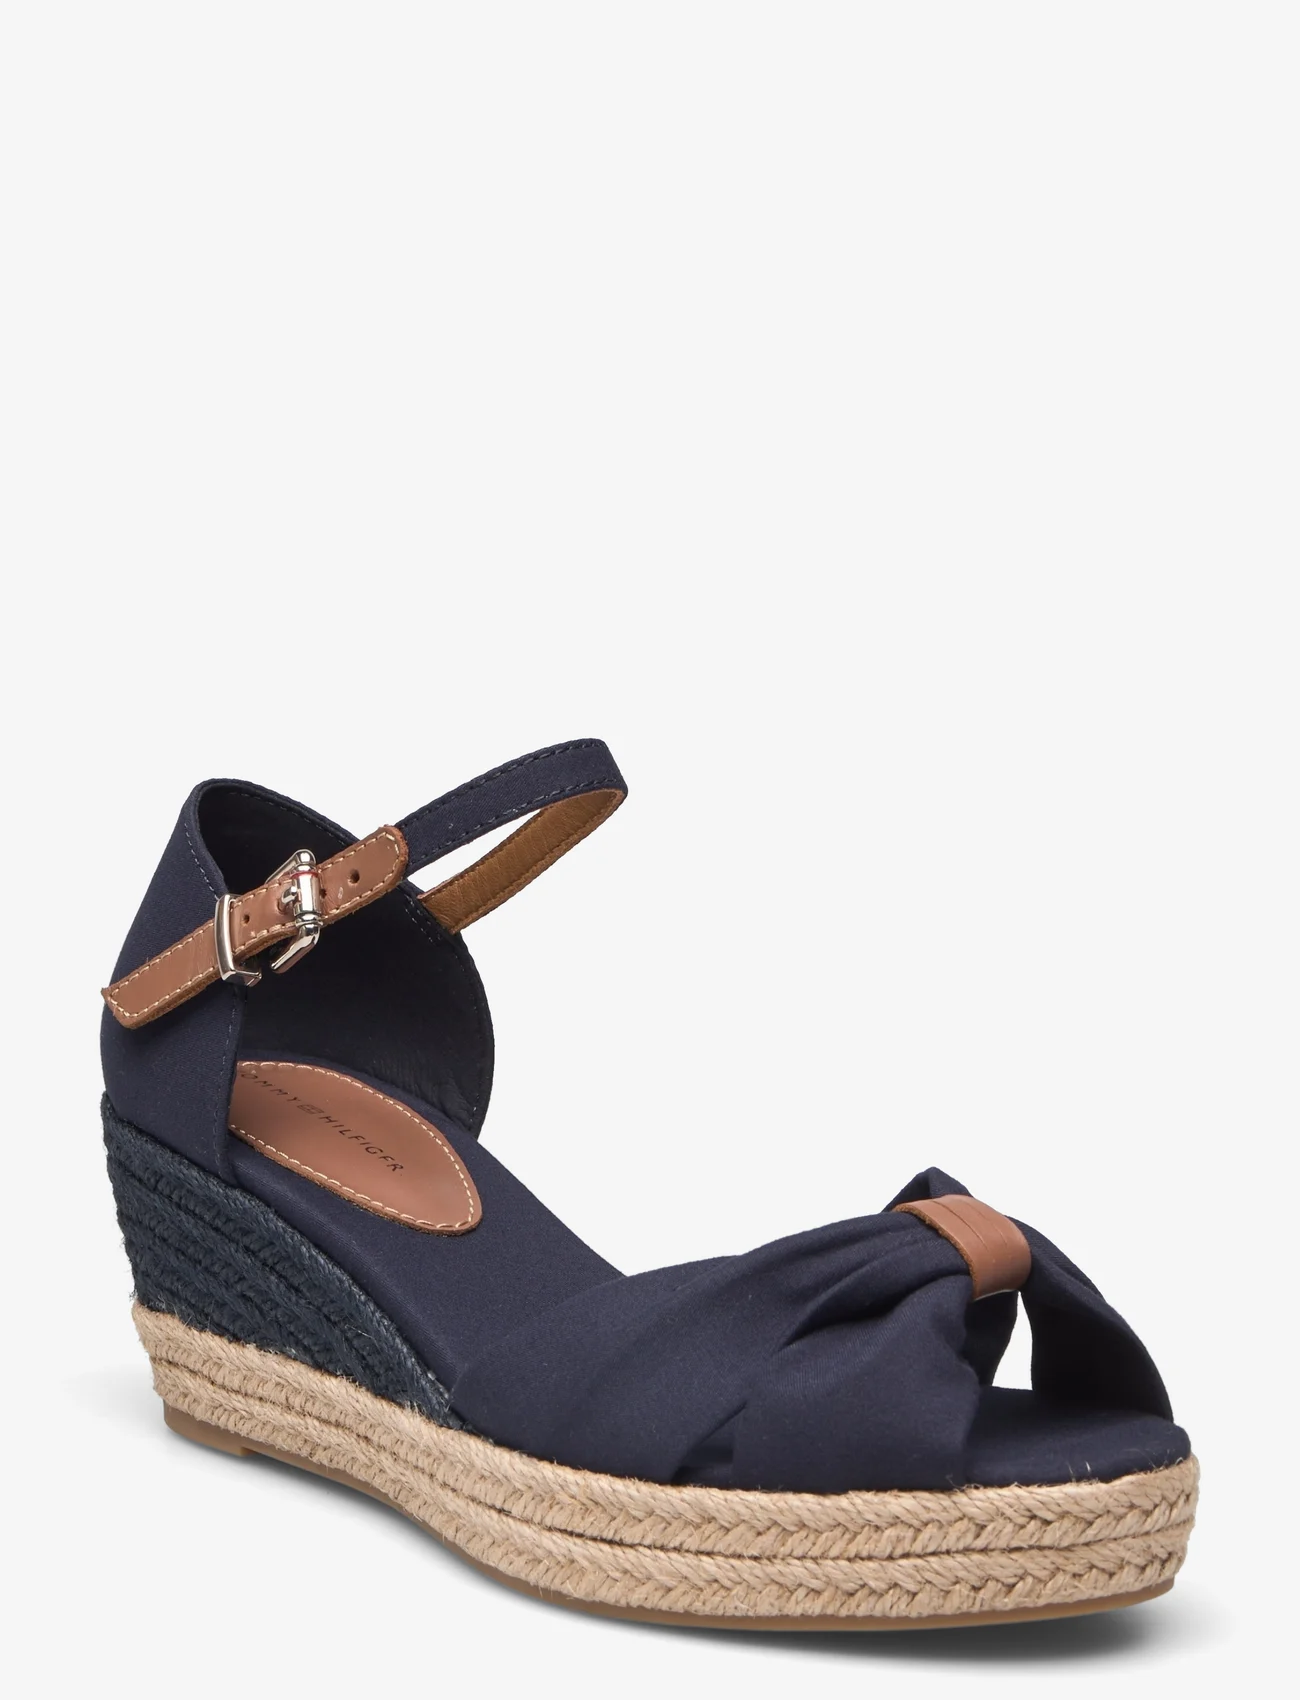 Tommy Hilfiger - BASIC OPEN TOE MID WEDGE - peoriided outlet-hindadega - space blue - 0